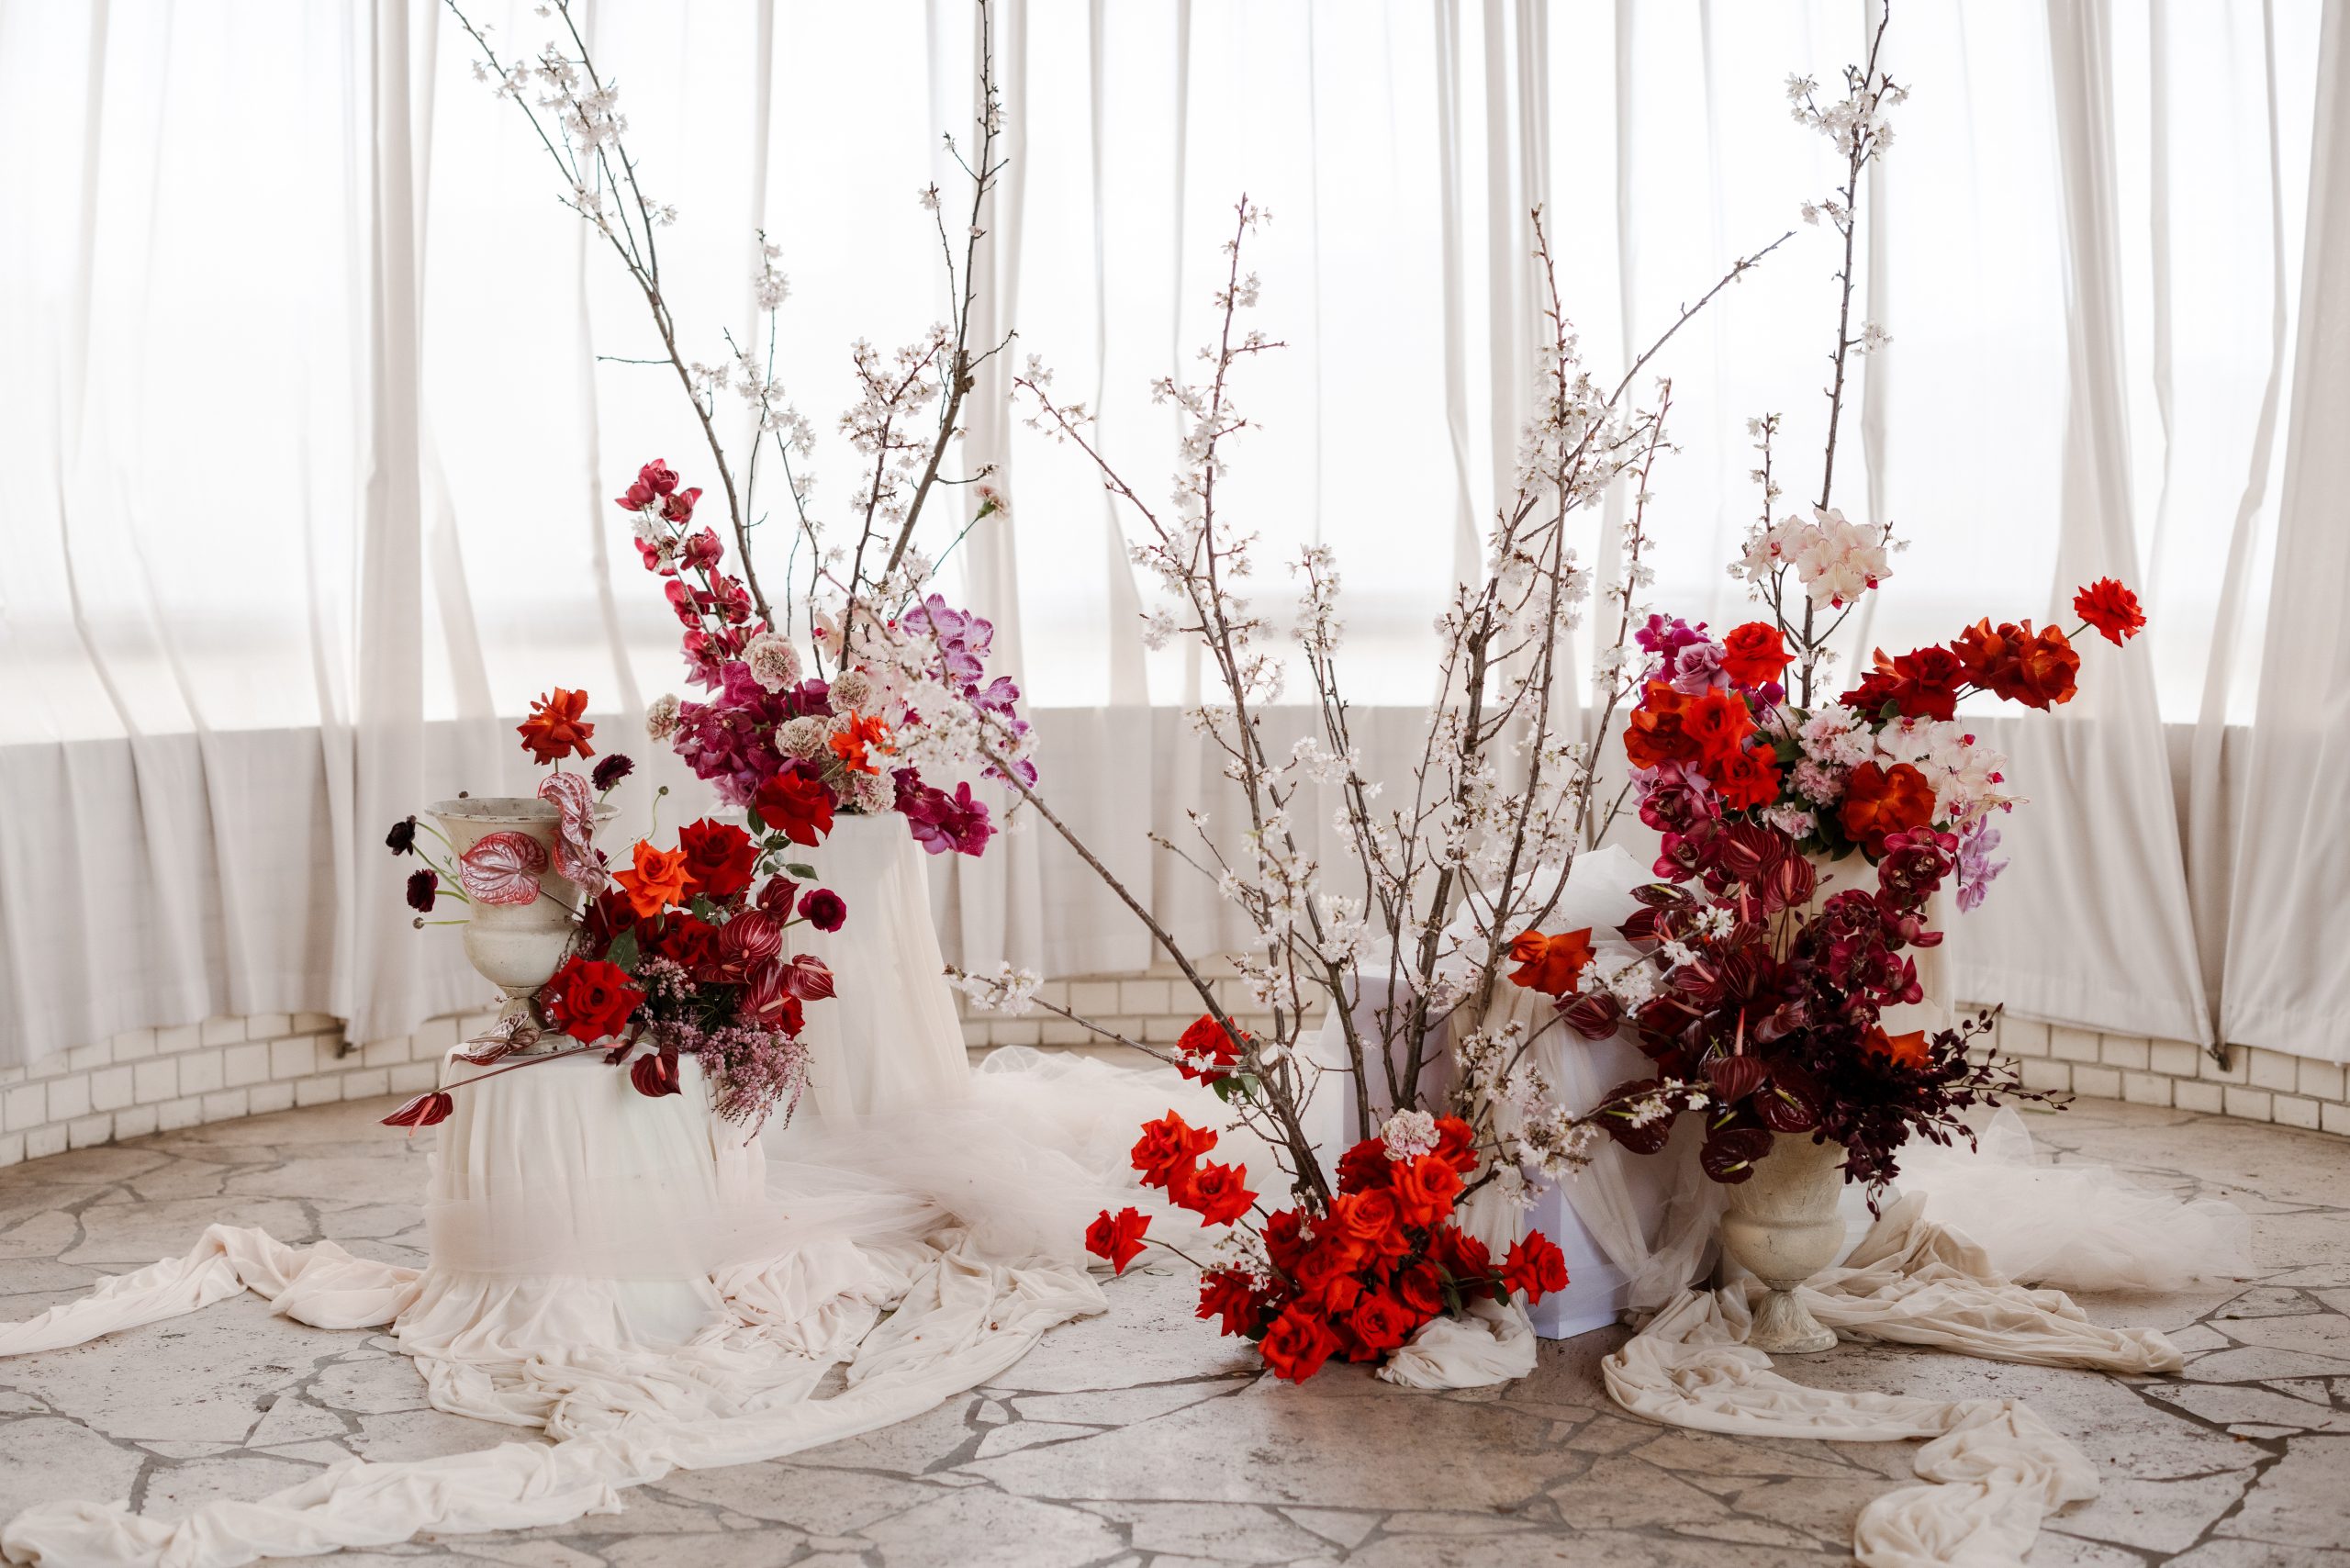 White curtains over the windows and on the floors with bright red and pink flowers and white cherry blossom trees.